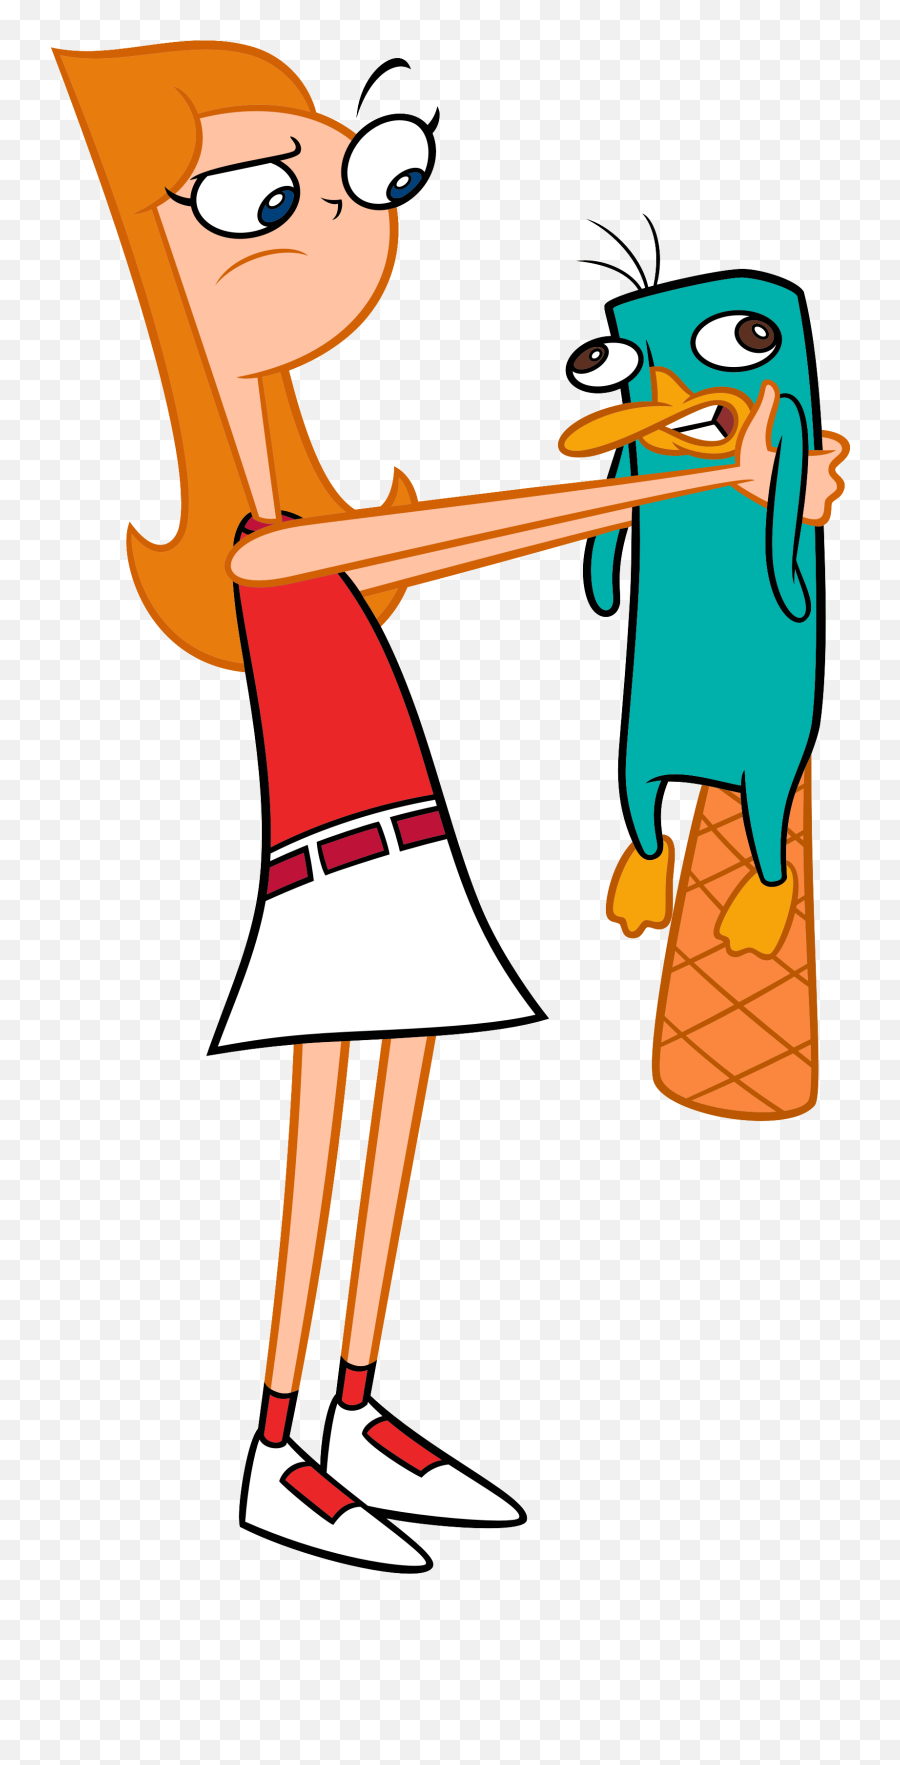 Phineas And Ferb Png Free Download - Perry Candace Perry Phineas And Ferb Emoji,Phineas And Ferb Logo